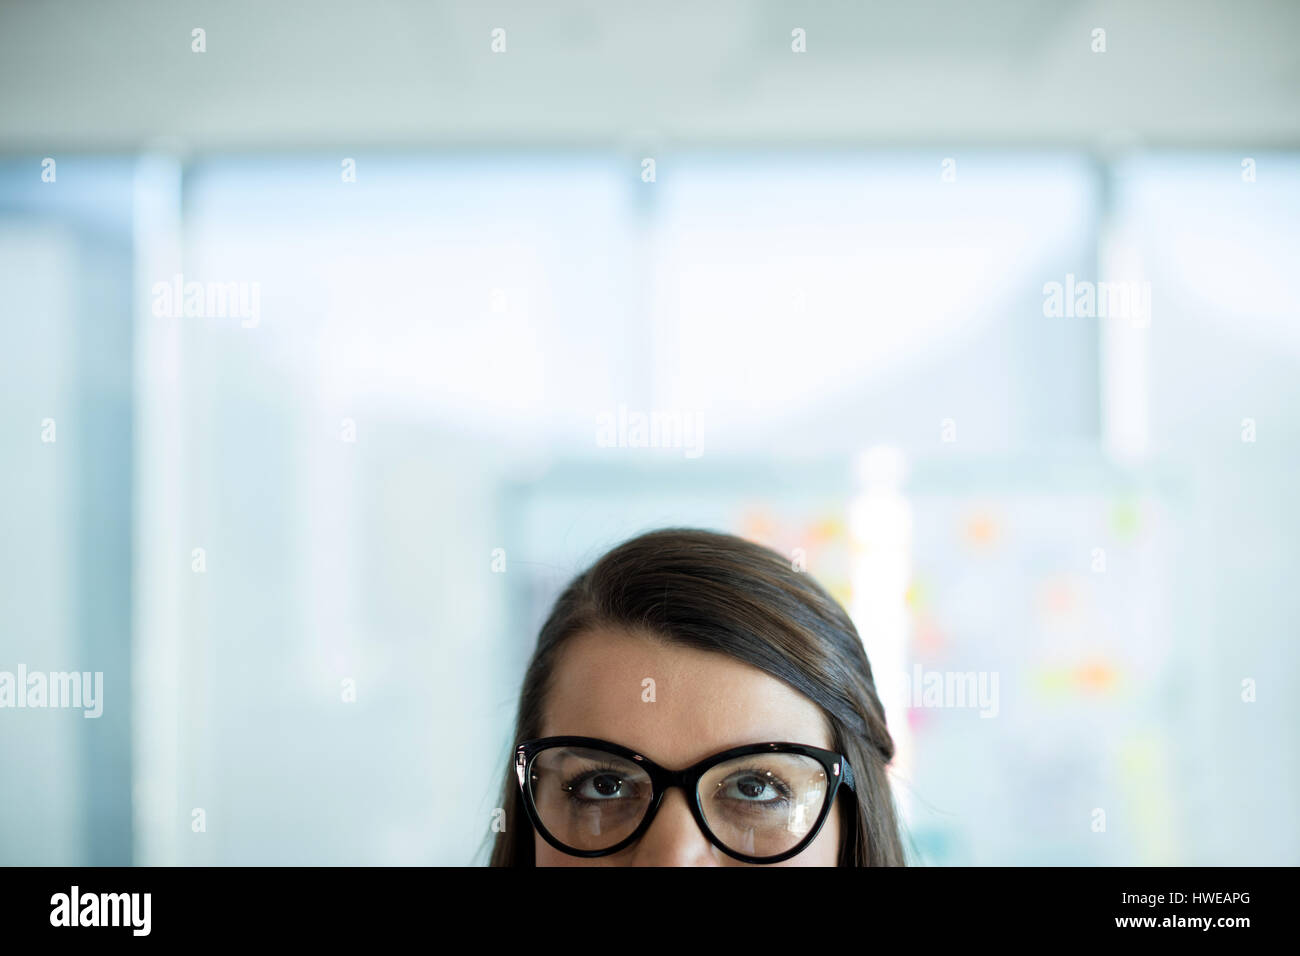 Woman in spectacles glancing upwards in office Stock Photo